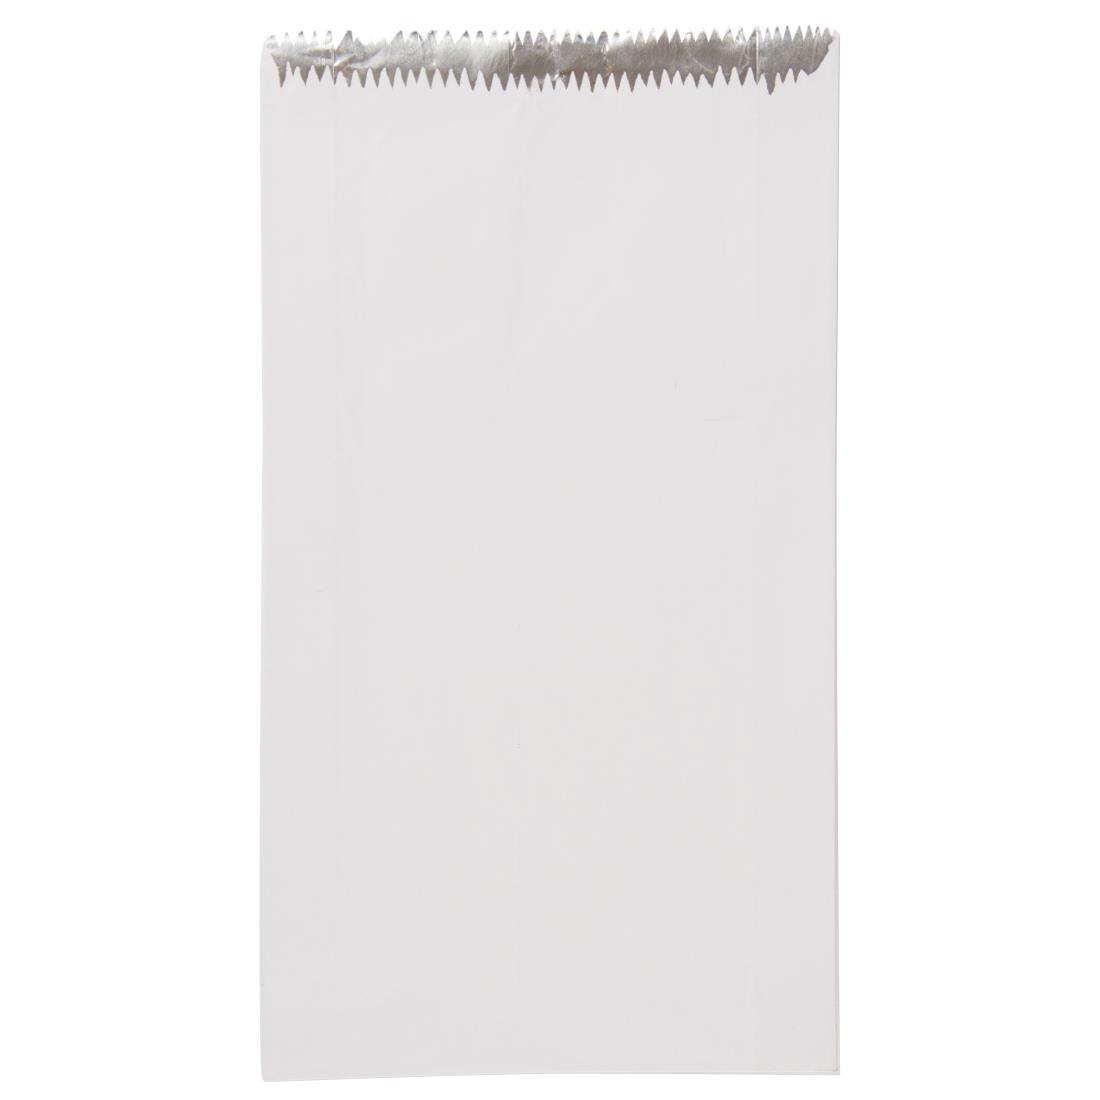 Foil Lined Paper Bags (Pack of 500) - GH033  - 2